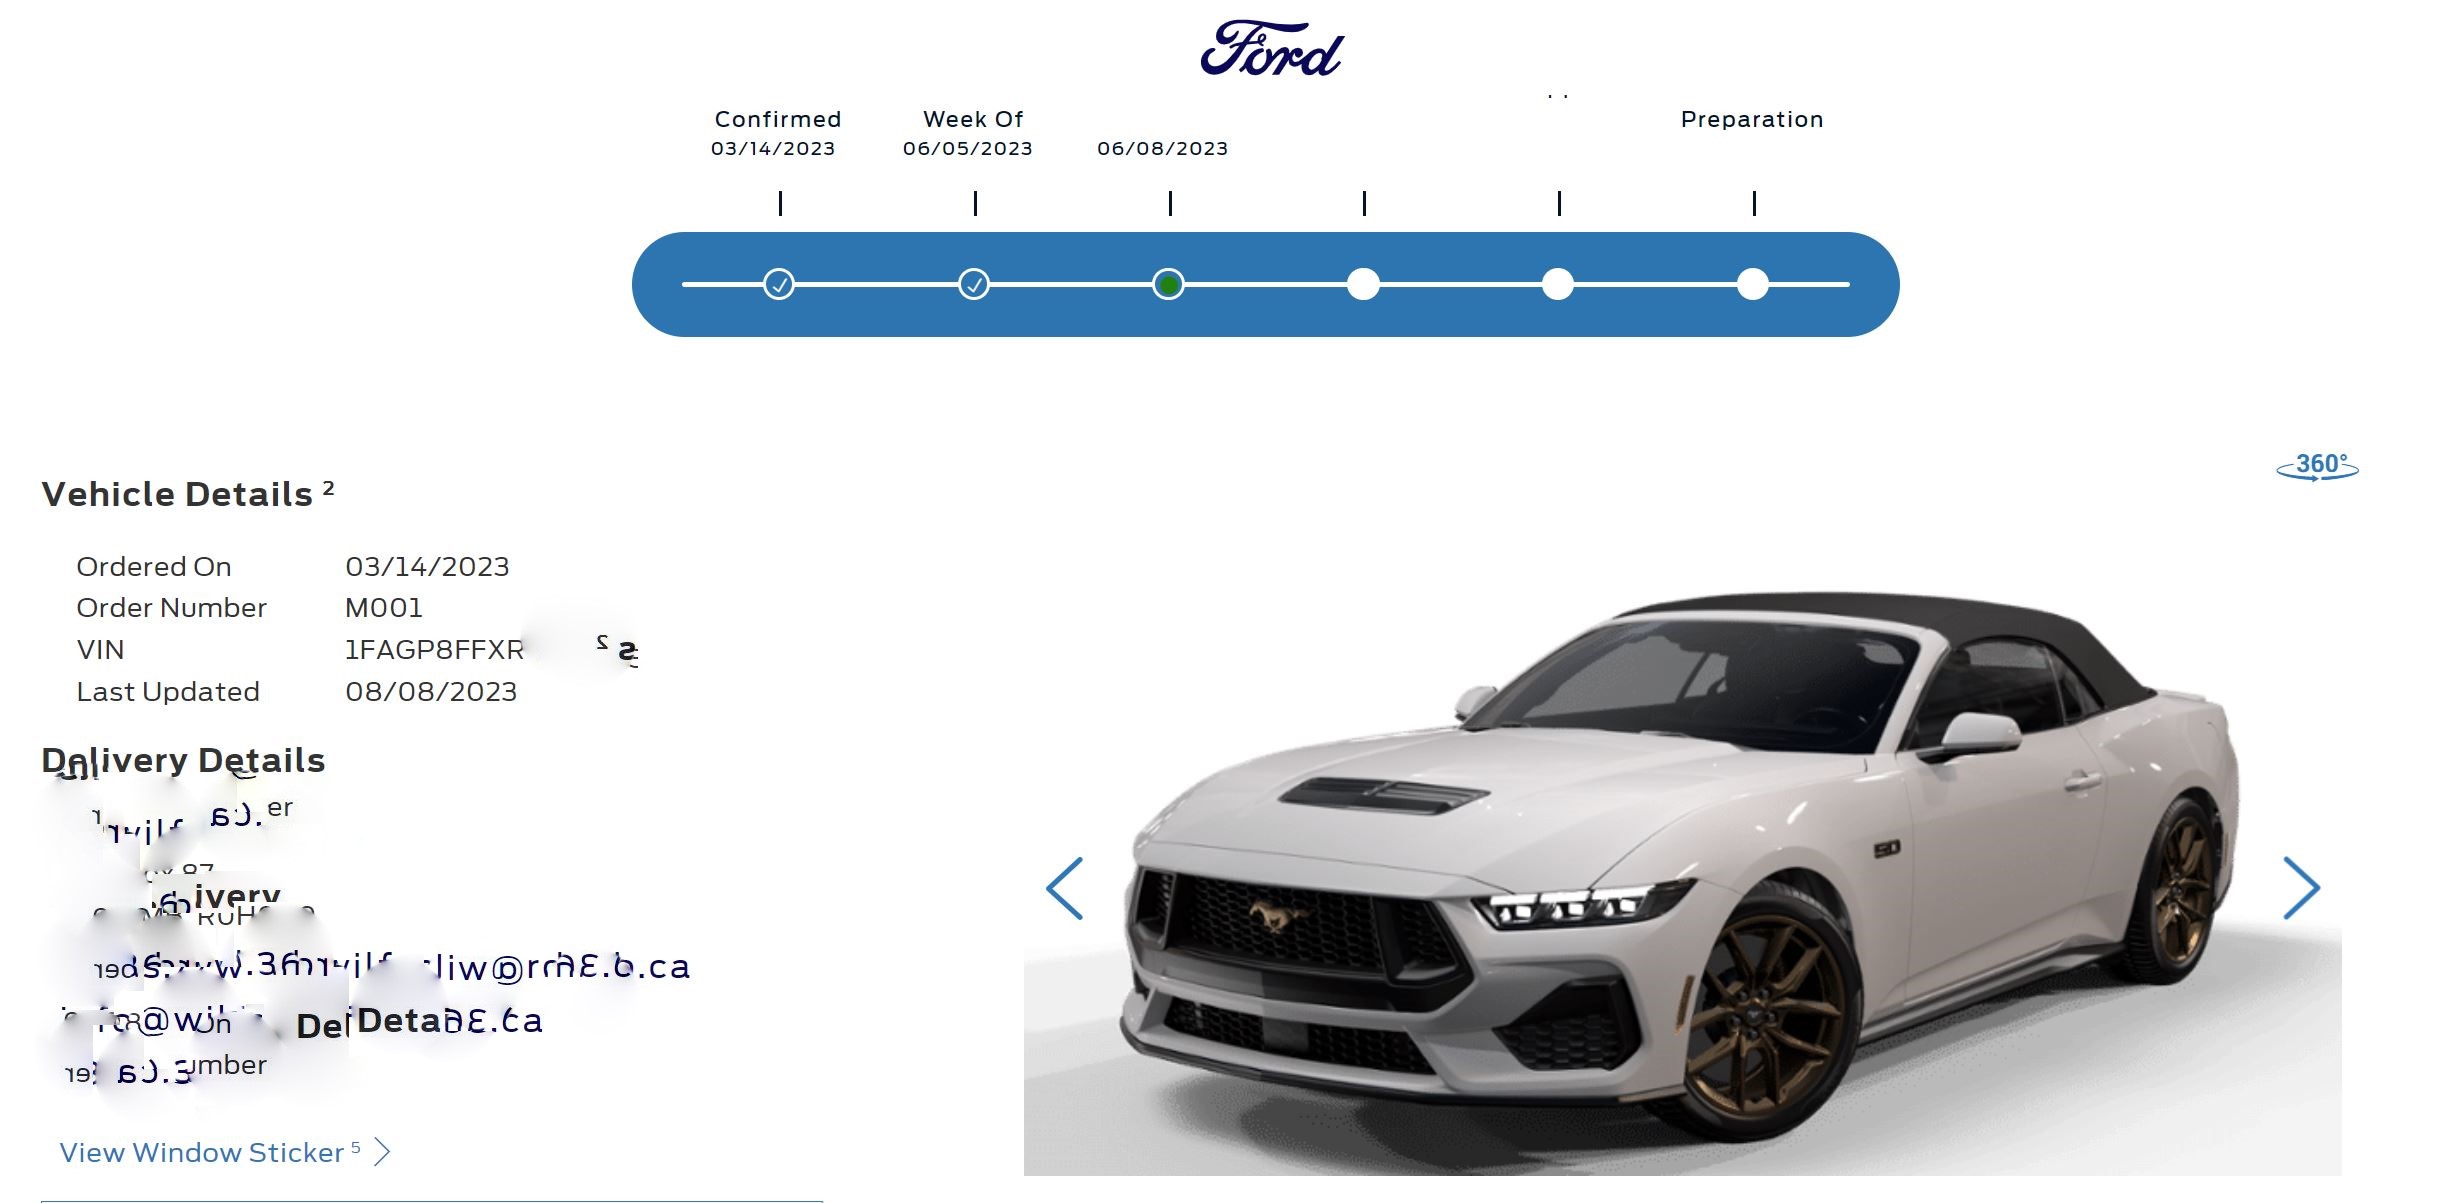 S650 Mustang BUILT & SHIPPED !! Tracker update 2023: What's your status? SnipImage (003)